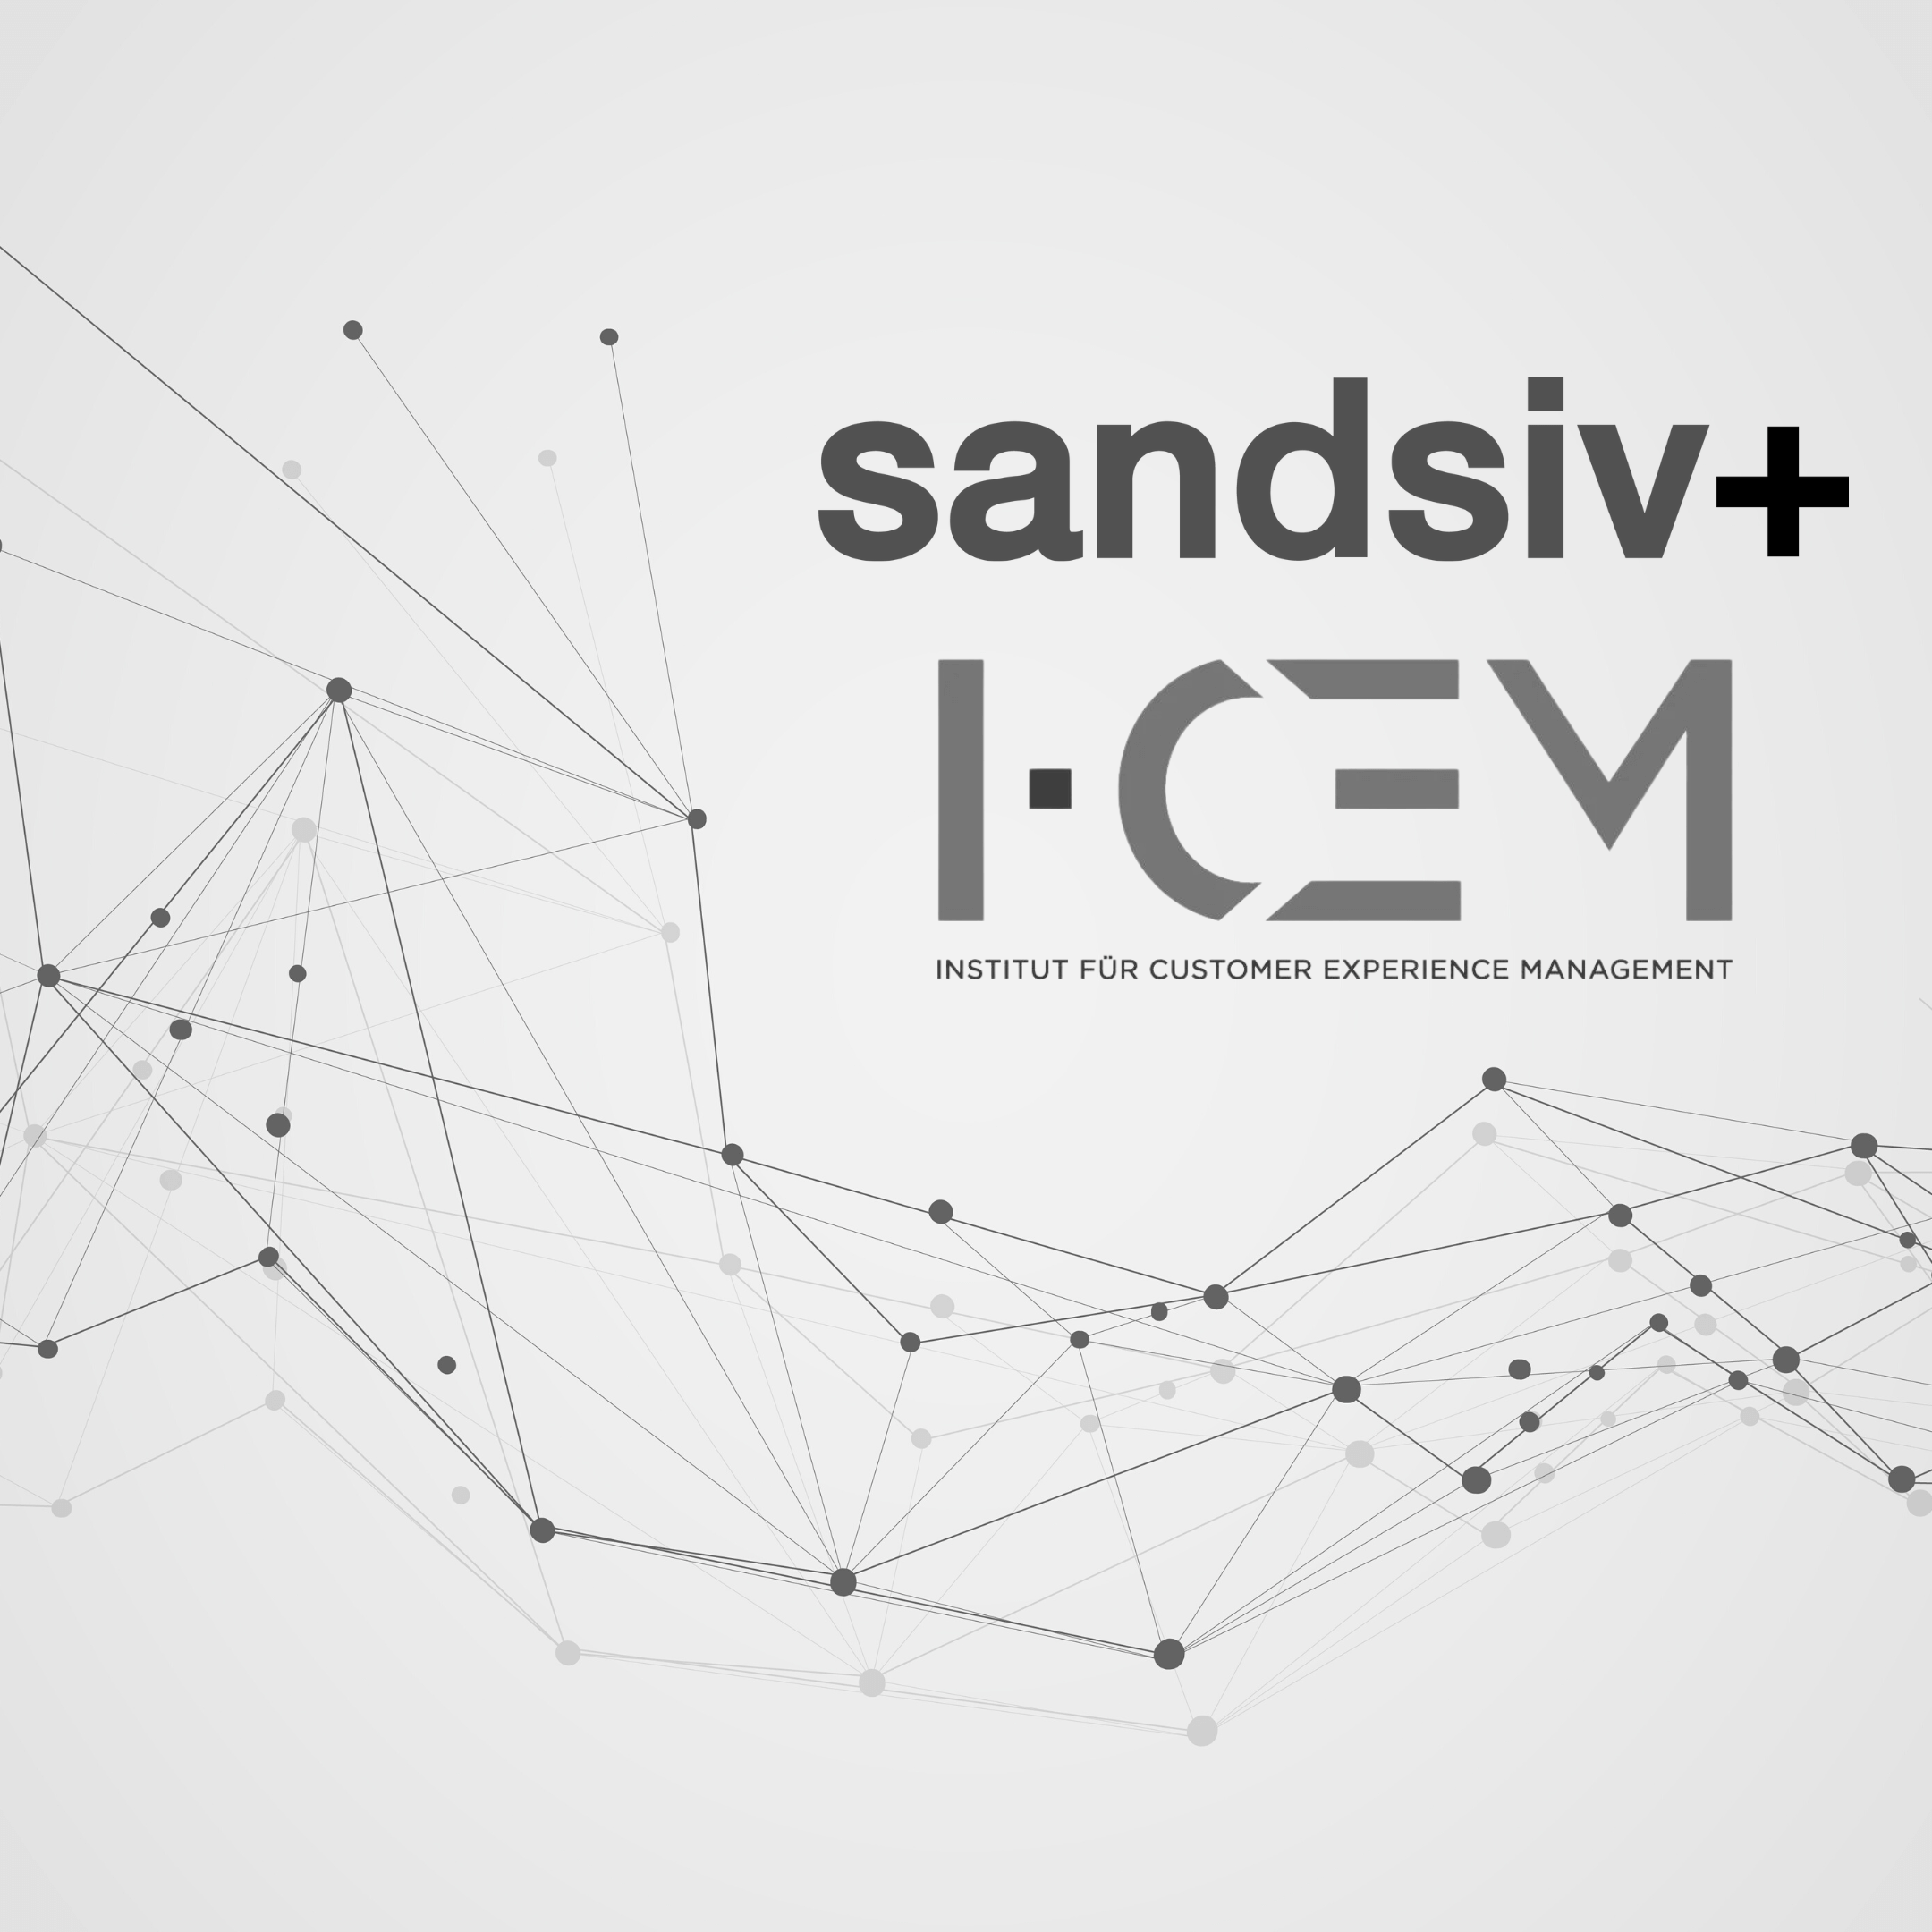 SANDSIV is a new partner in the network of the i-CEM initiative